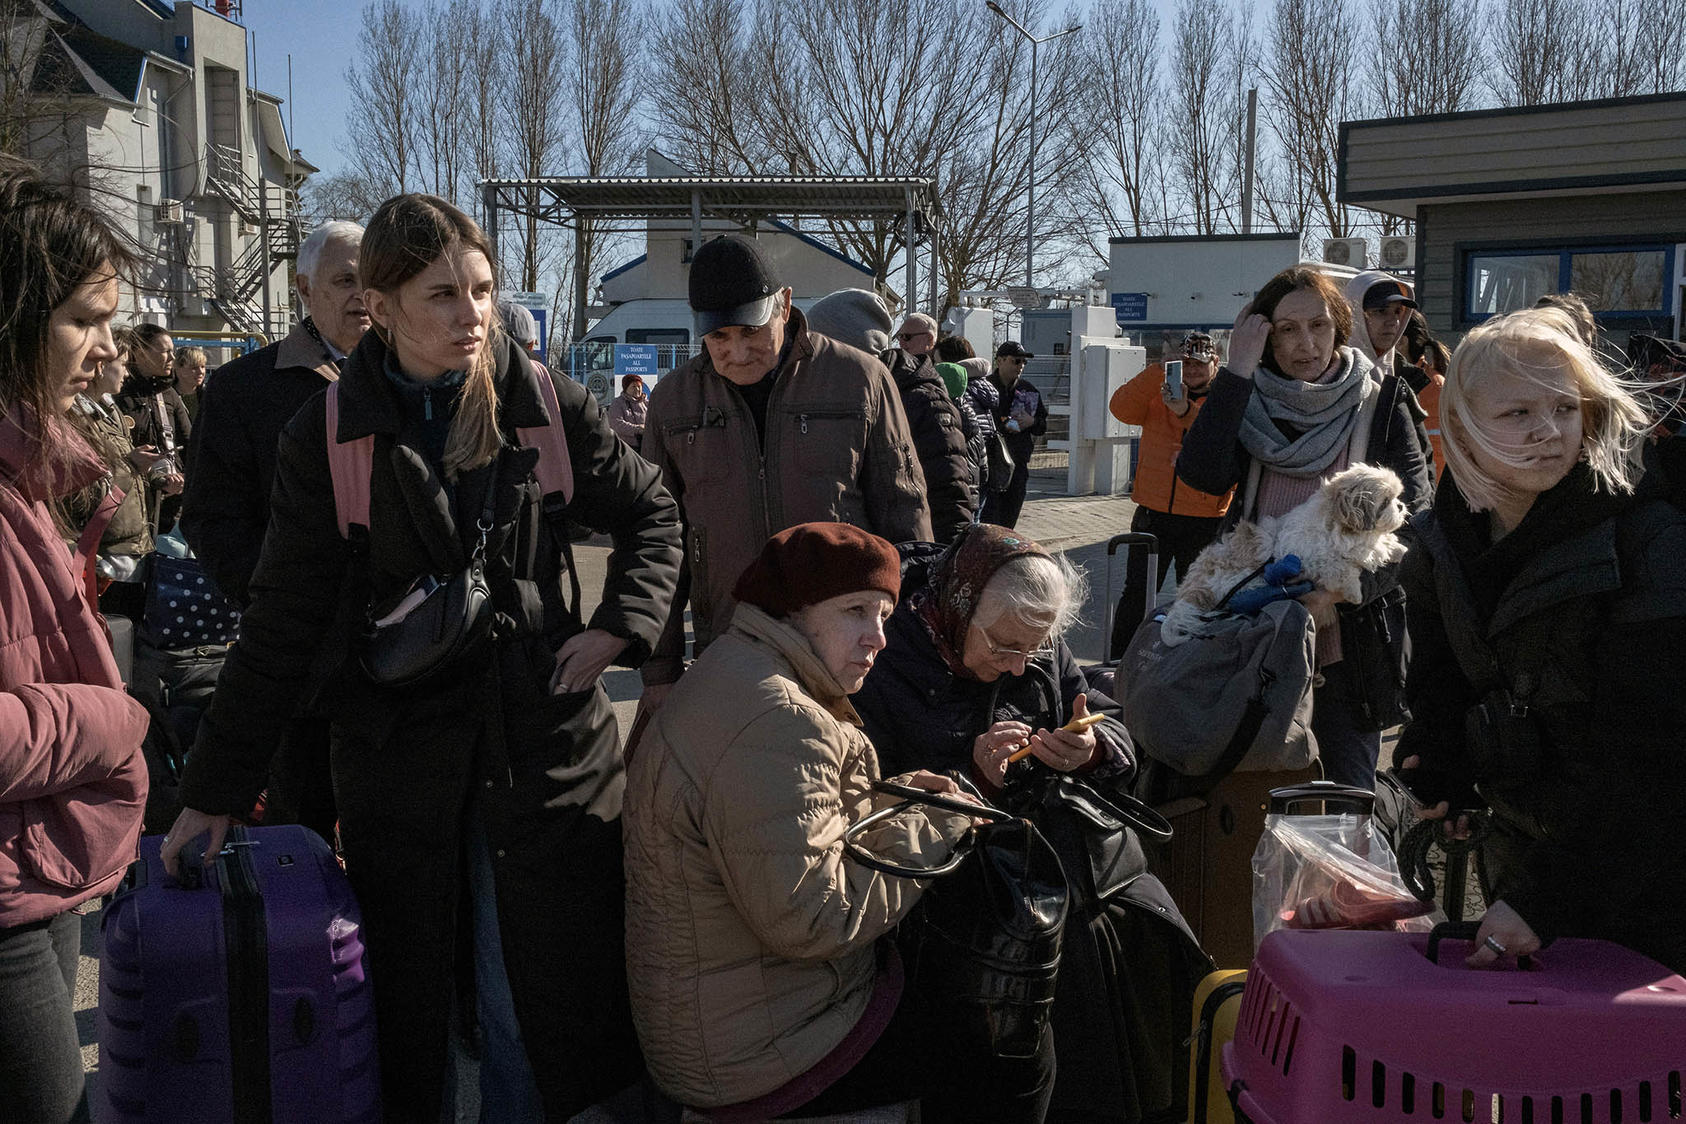 Ukrainians fleeing Russia’s new invasion wait for buses after crossing into Moldova in March. Moldova, Europe’s poorest country, hosts 85,000 refugees — and the entire population faces power and heat outages this winter. (Mauricio Lima/The New York Times)